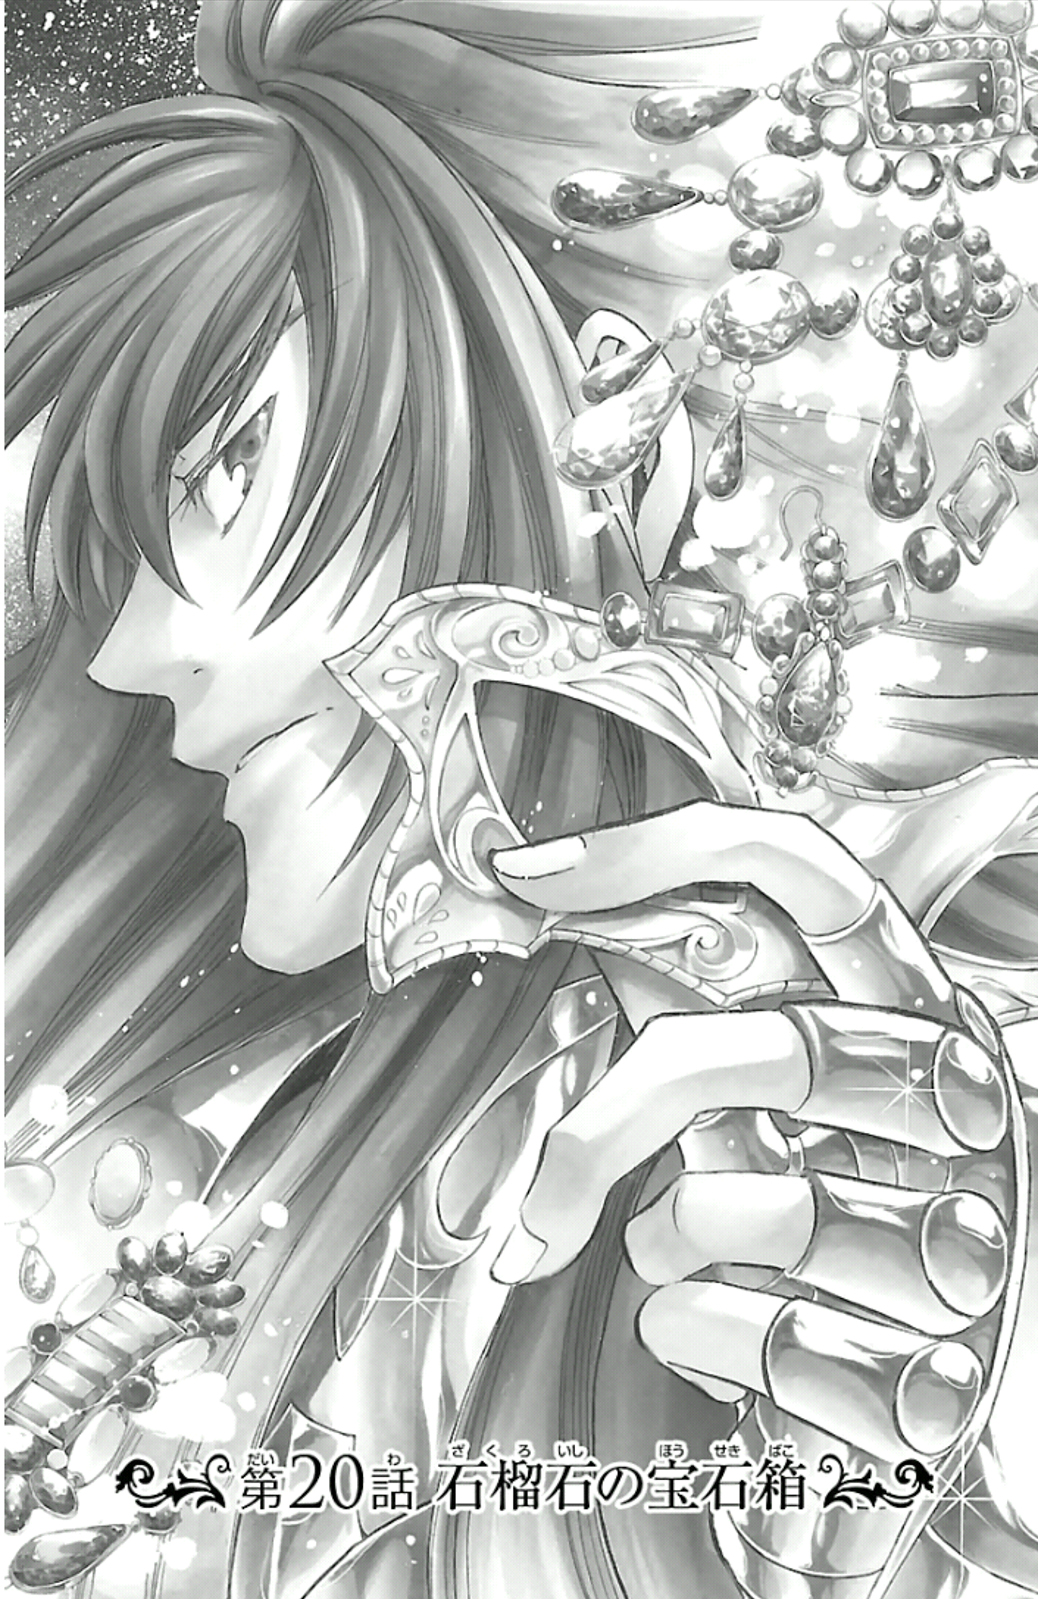 Saint Seiya - The Lost Canvas Gaiden Vol.3 Chapter 20: The Jewel Box Of Garnet - Picture 1